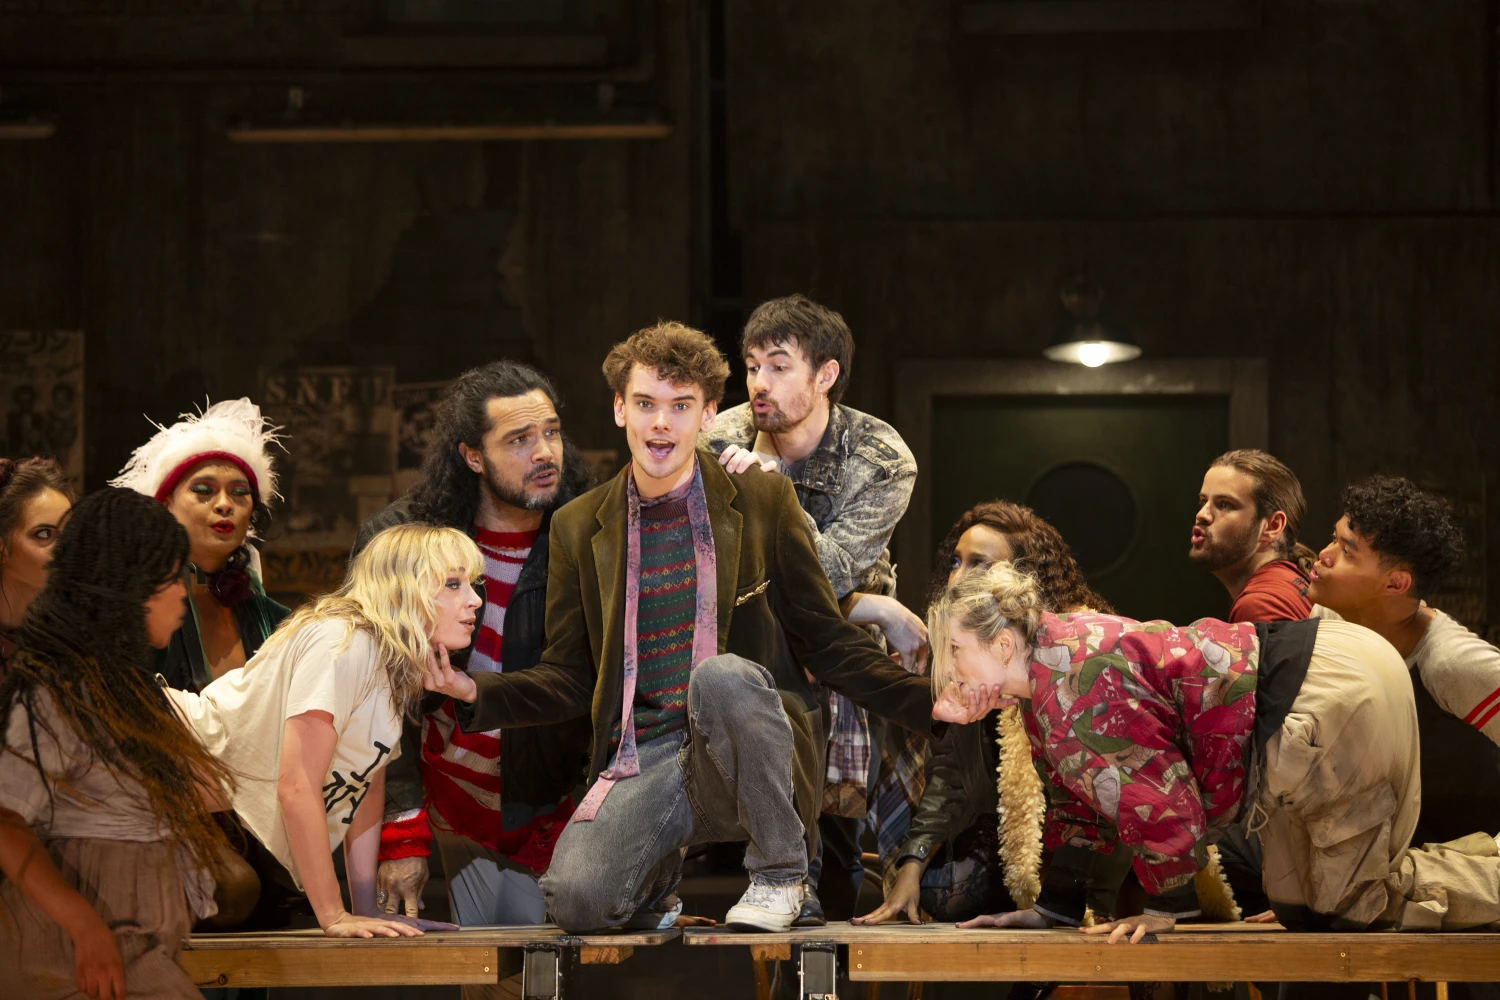 RENT: The Musical: What to expect - 4